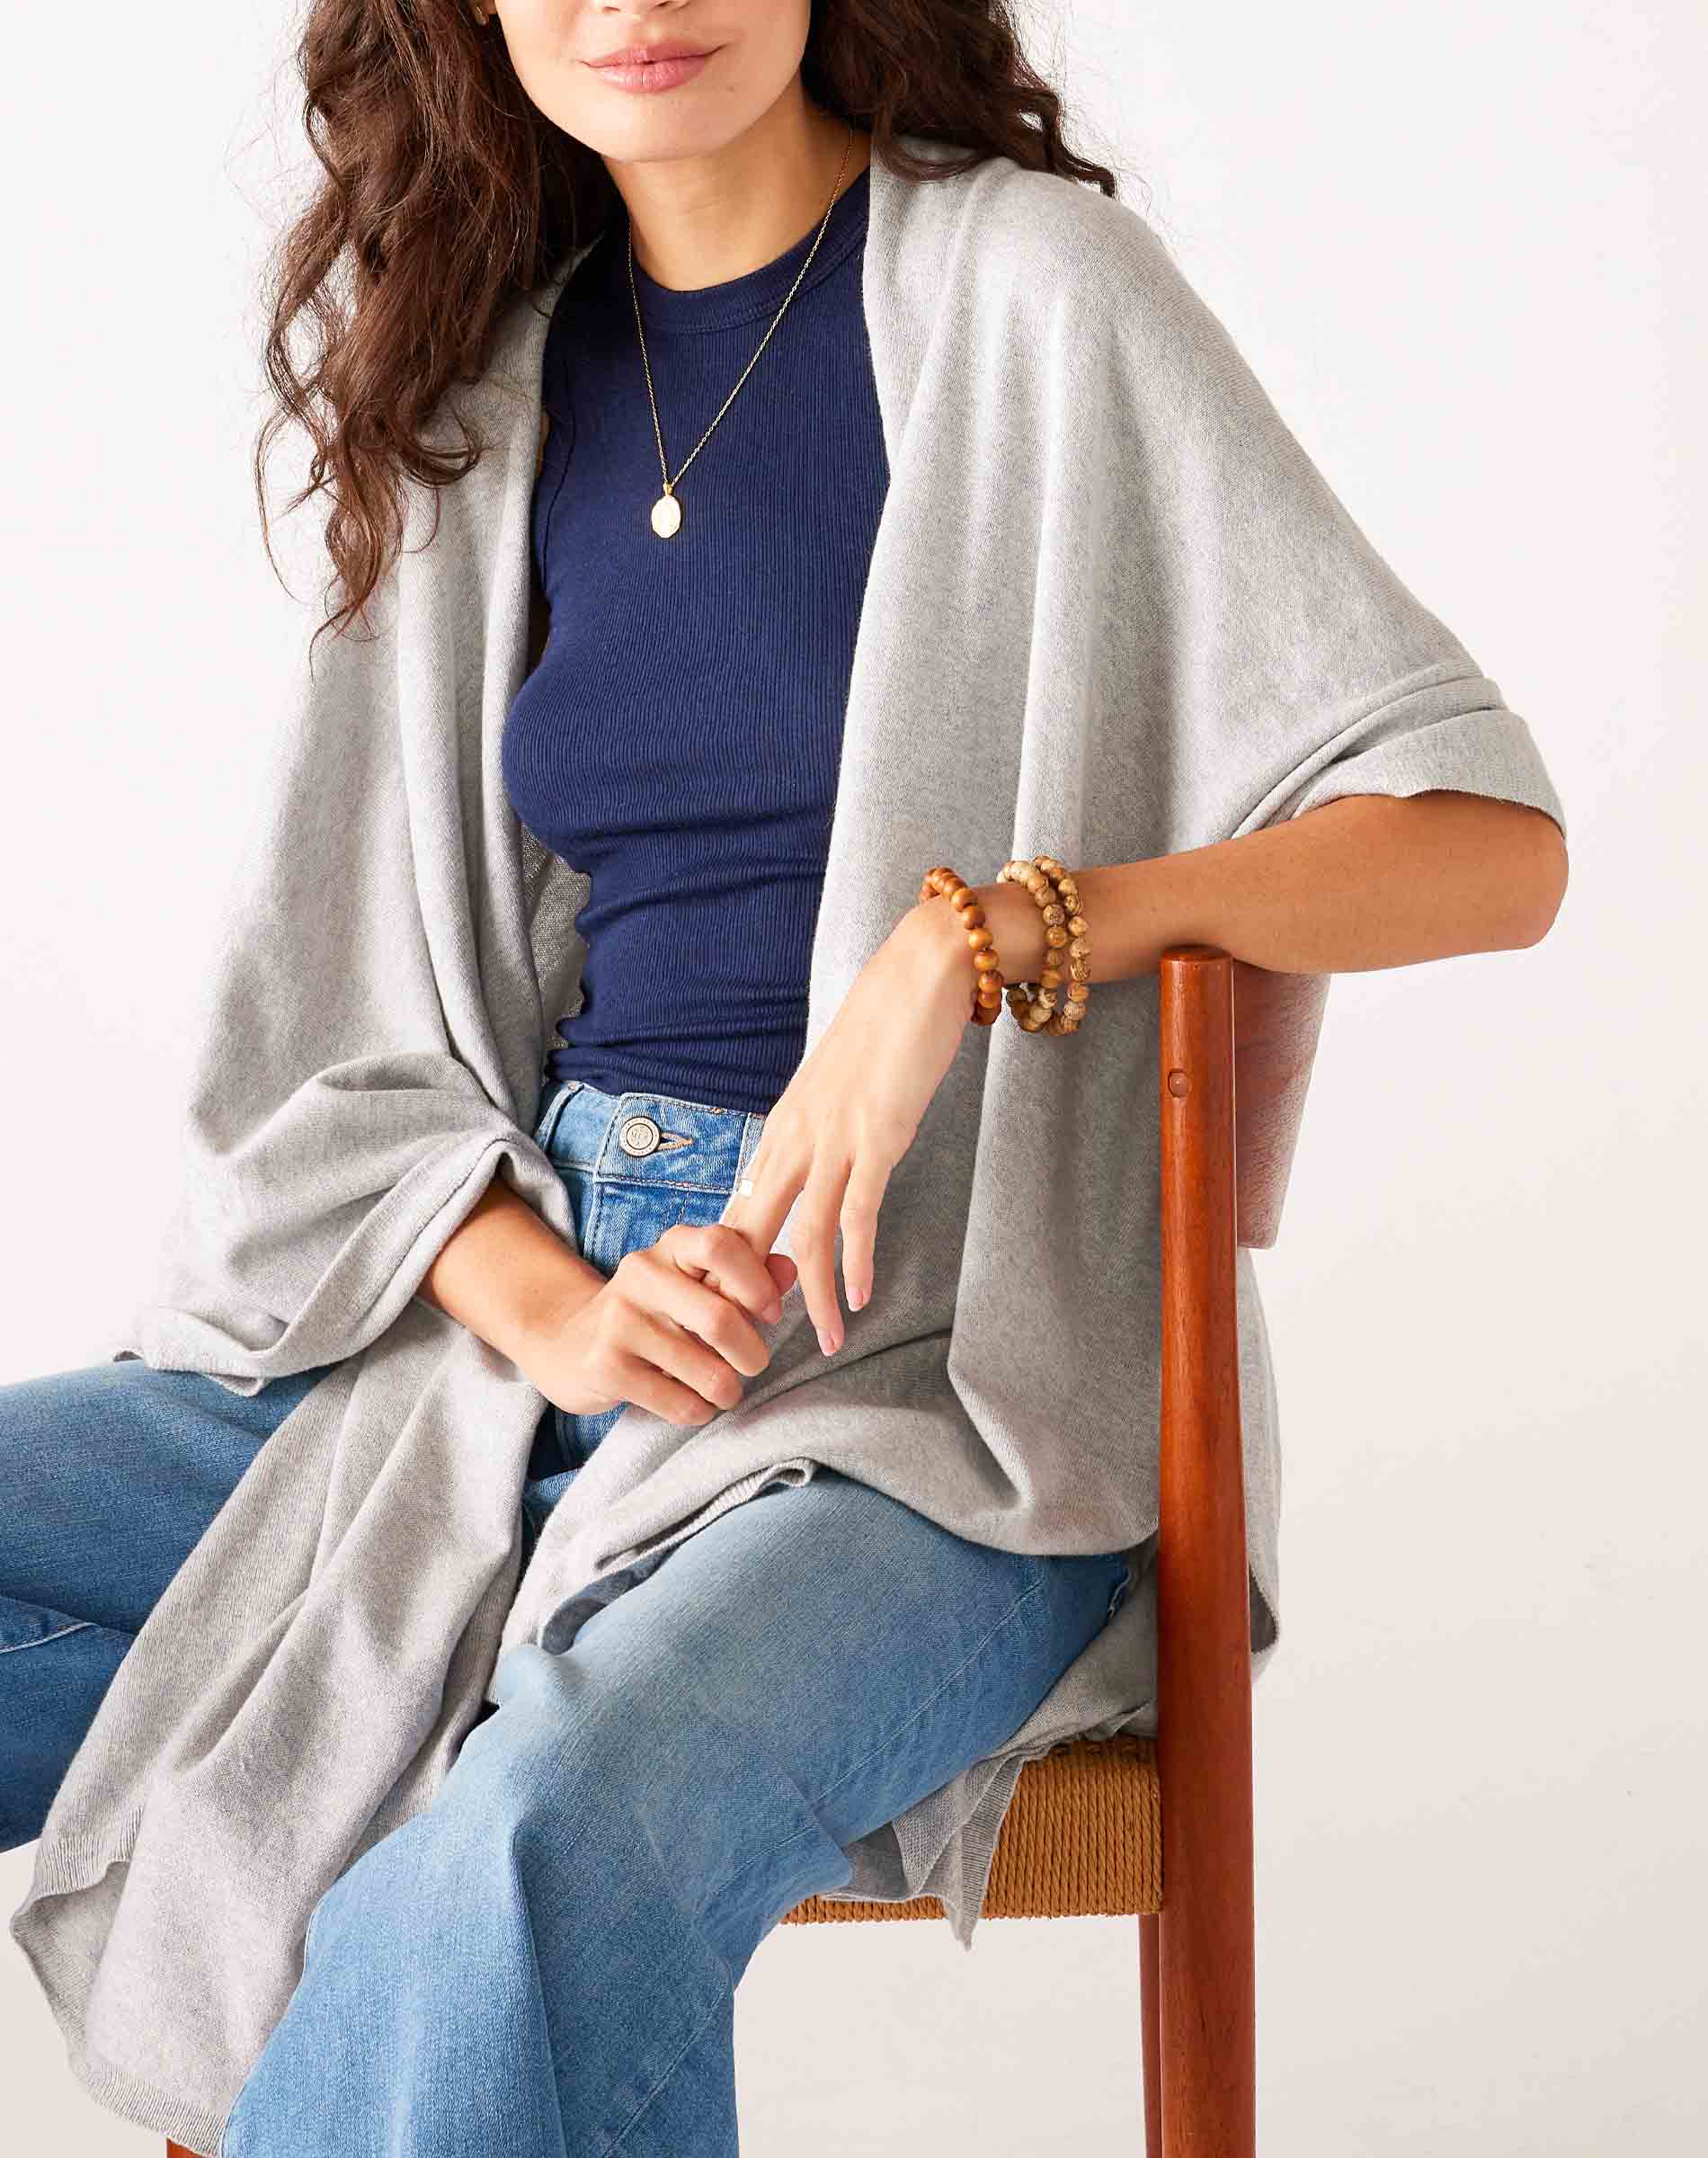 Women's Light Grey Heathered Cashmere Lightweight Travel Wrap Sitting Front View